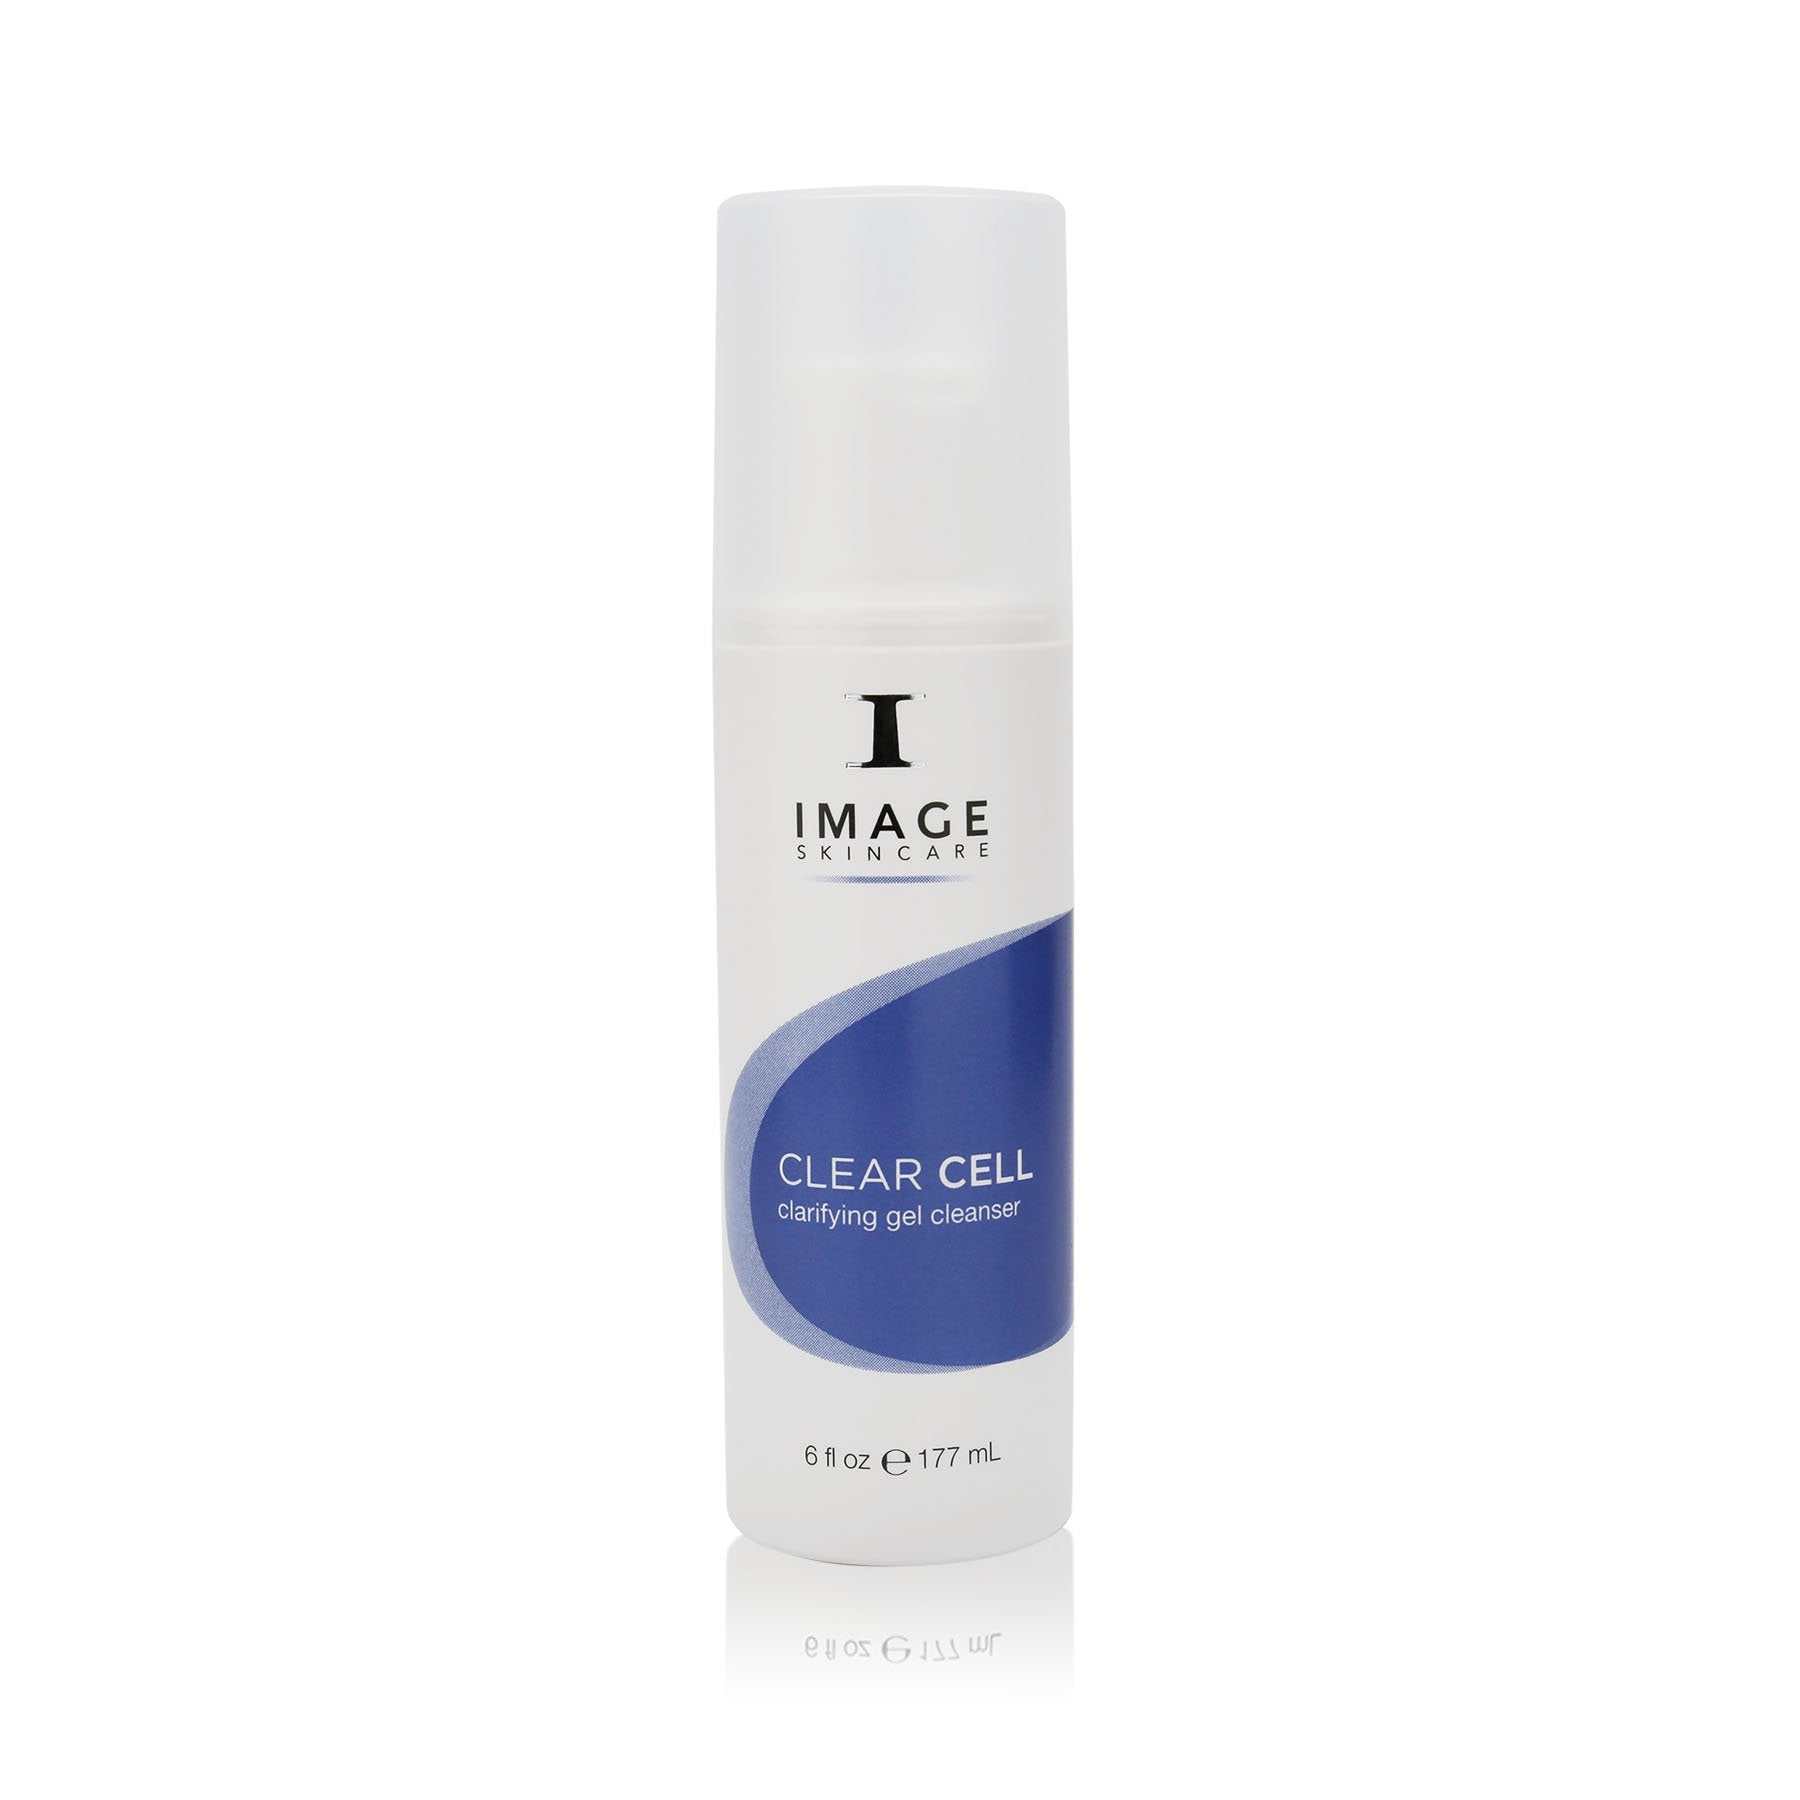 IMAGE Clear Cell Clarifying Gel Cleanser 177ml